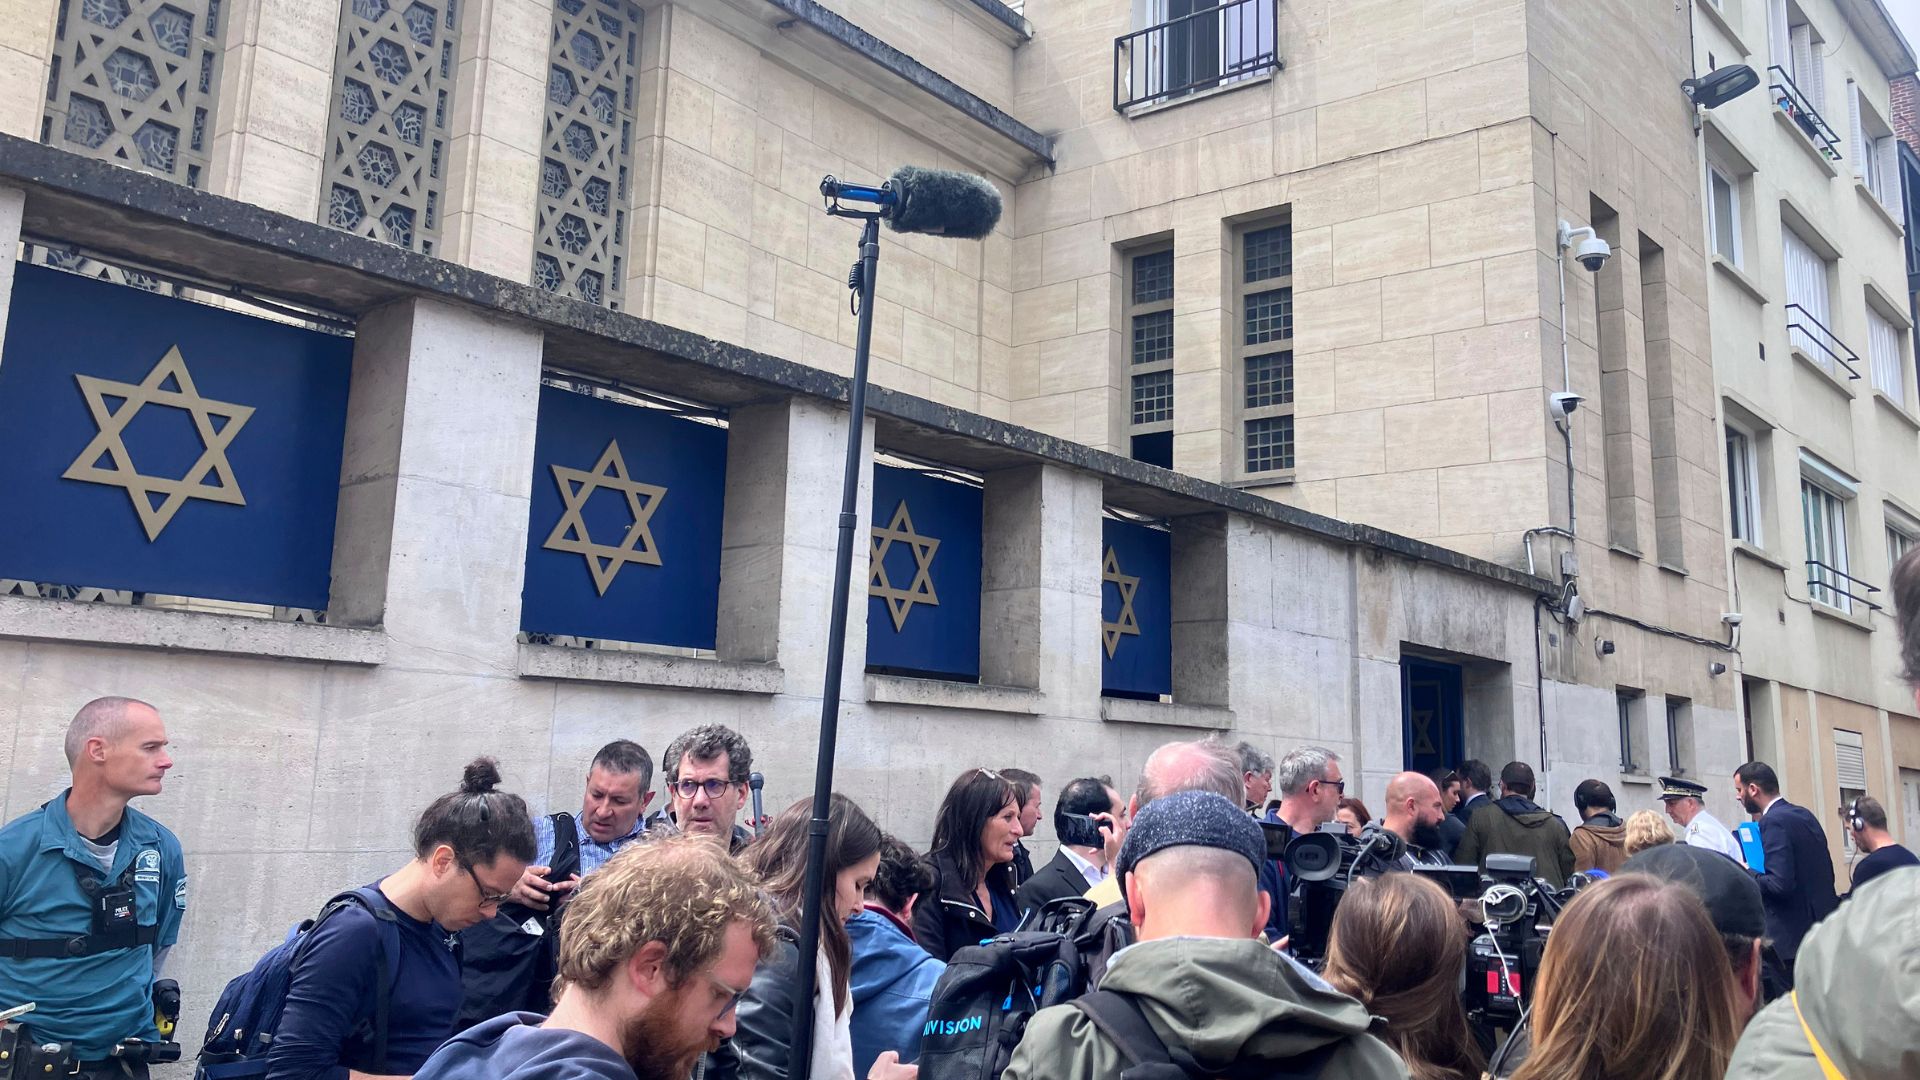 Journalists gather in front of the synagogue. /Oleg Cetinic/AP